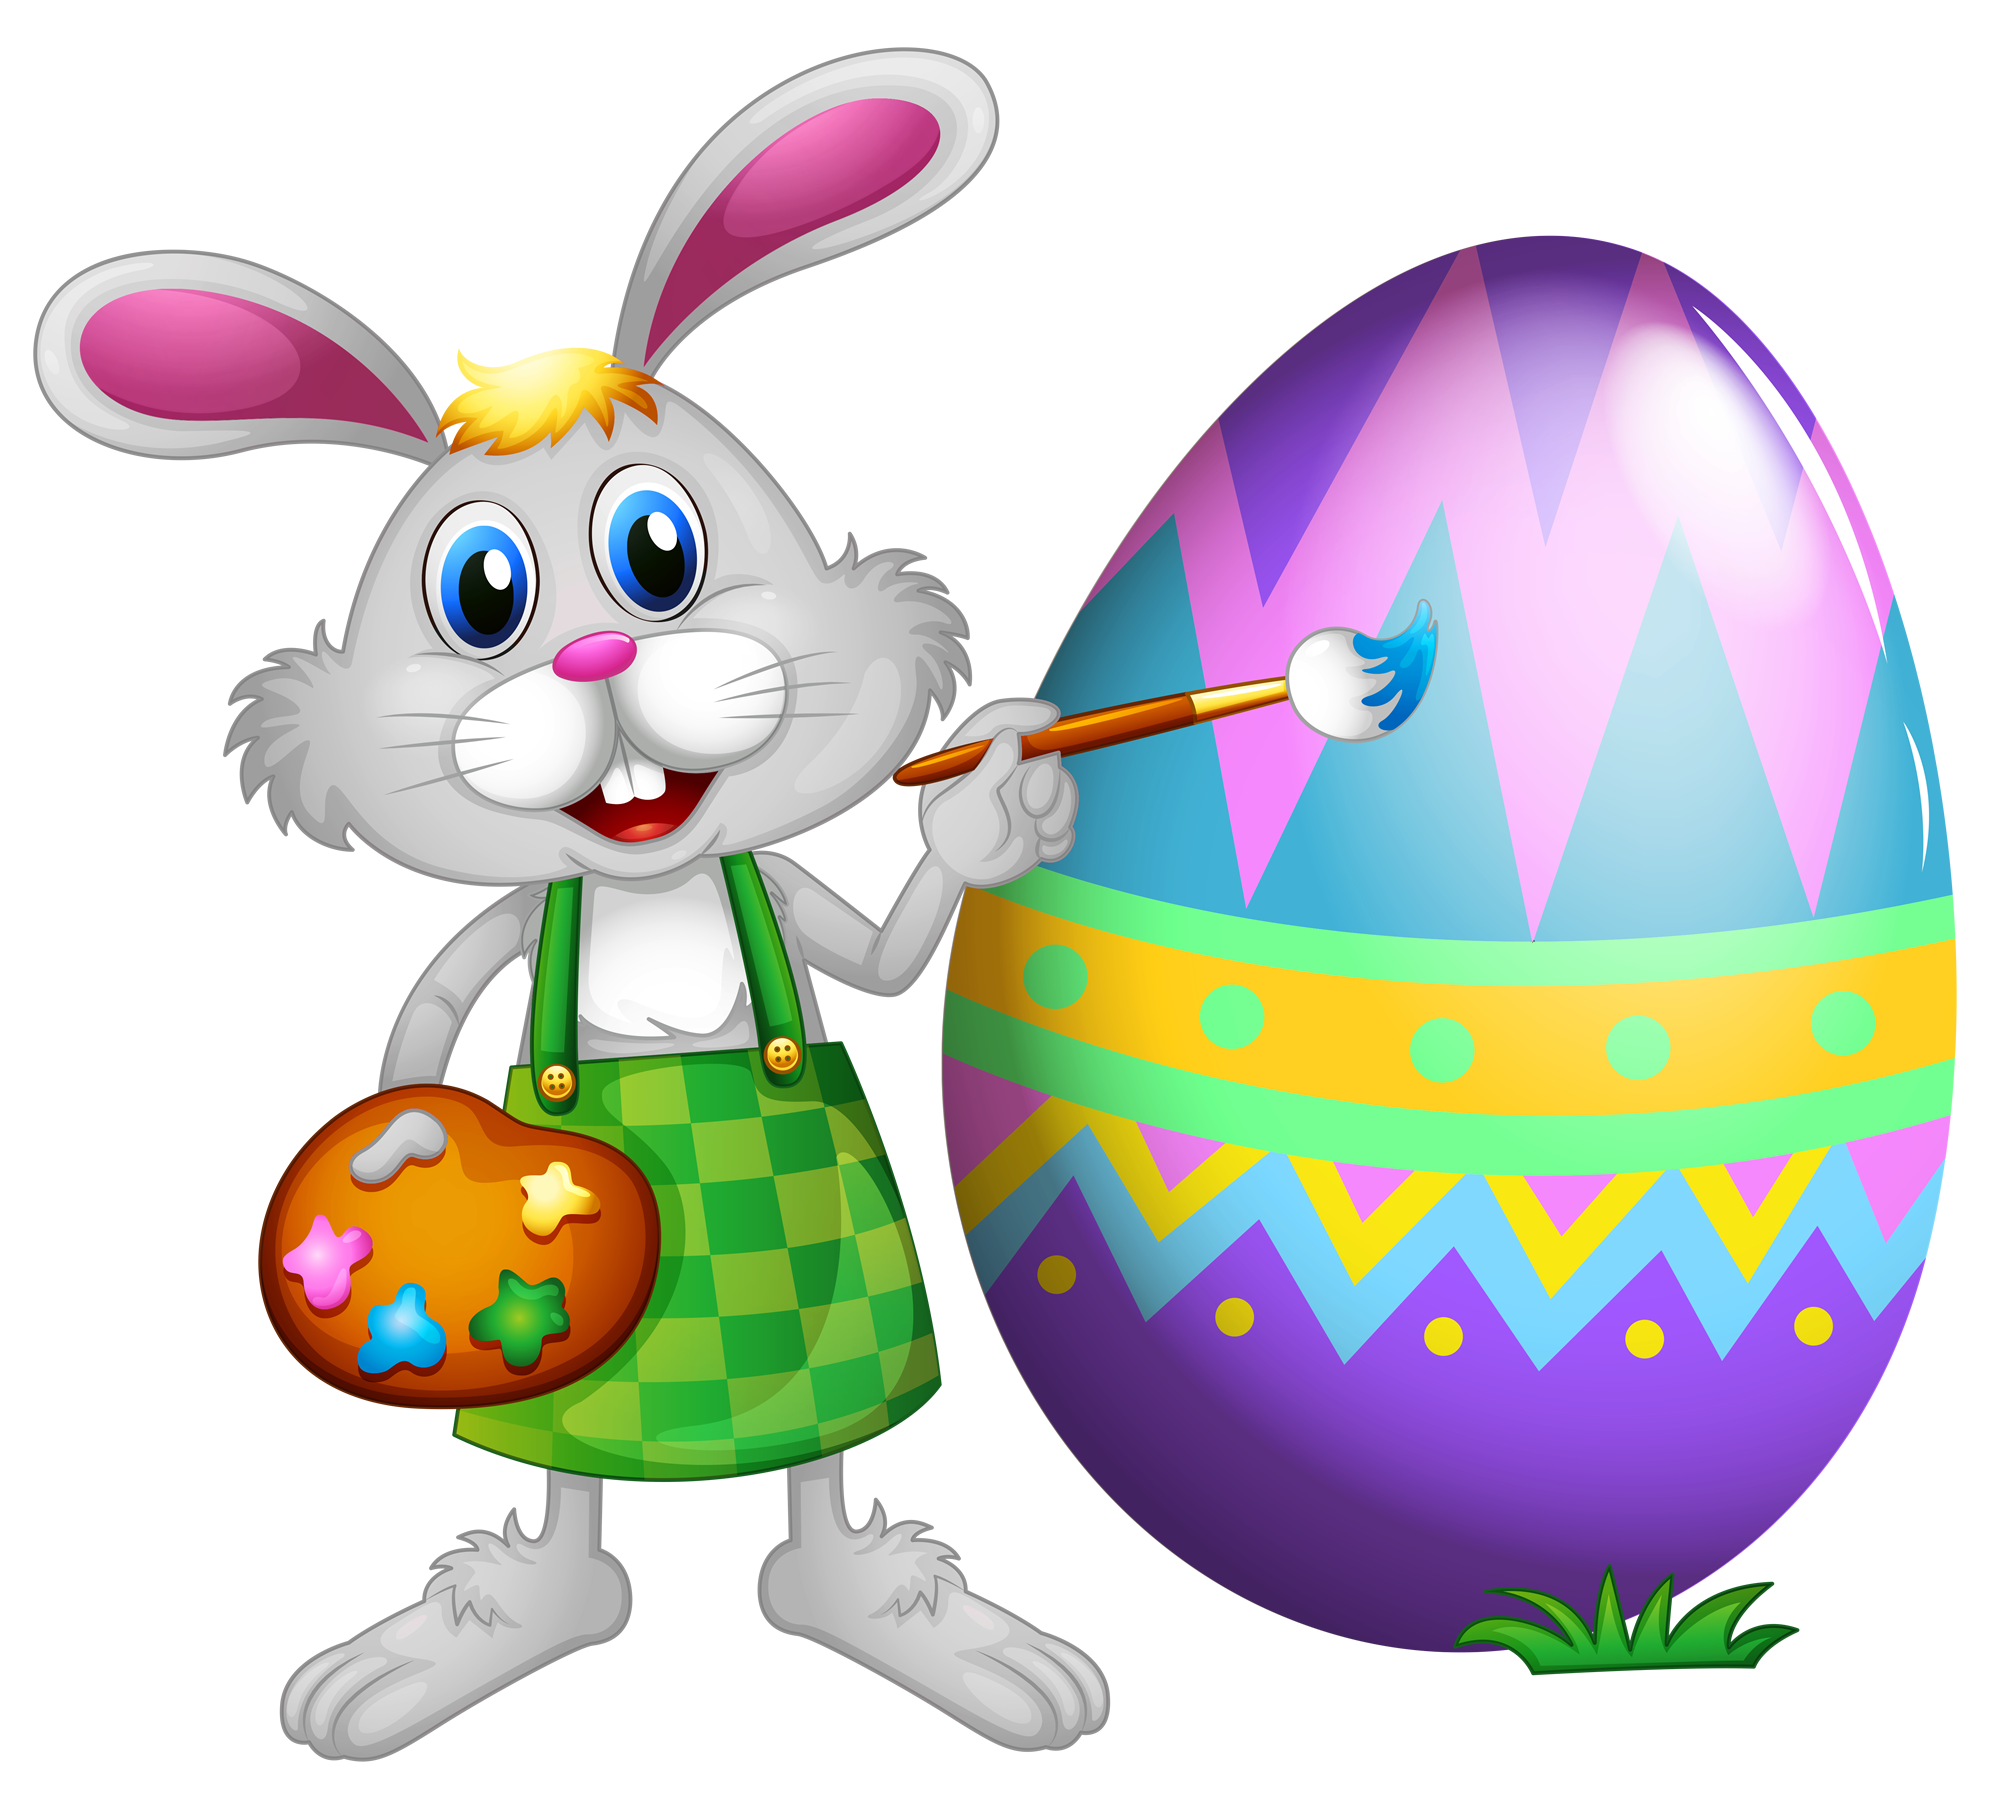 Happy Easter Bunny Pictures PNG Transparent Background, Free Download 46567 FreeIconsPNG